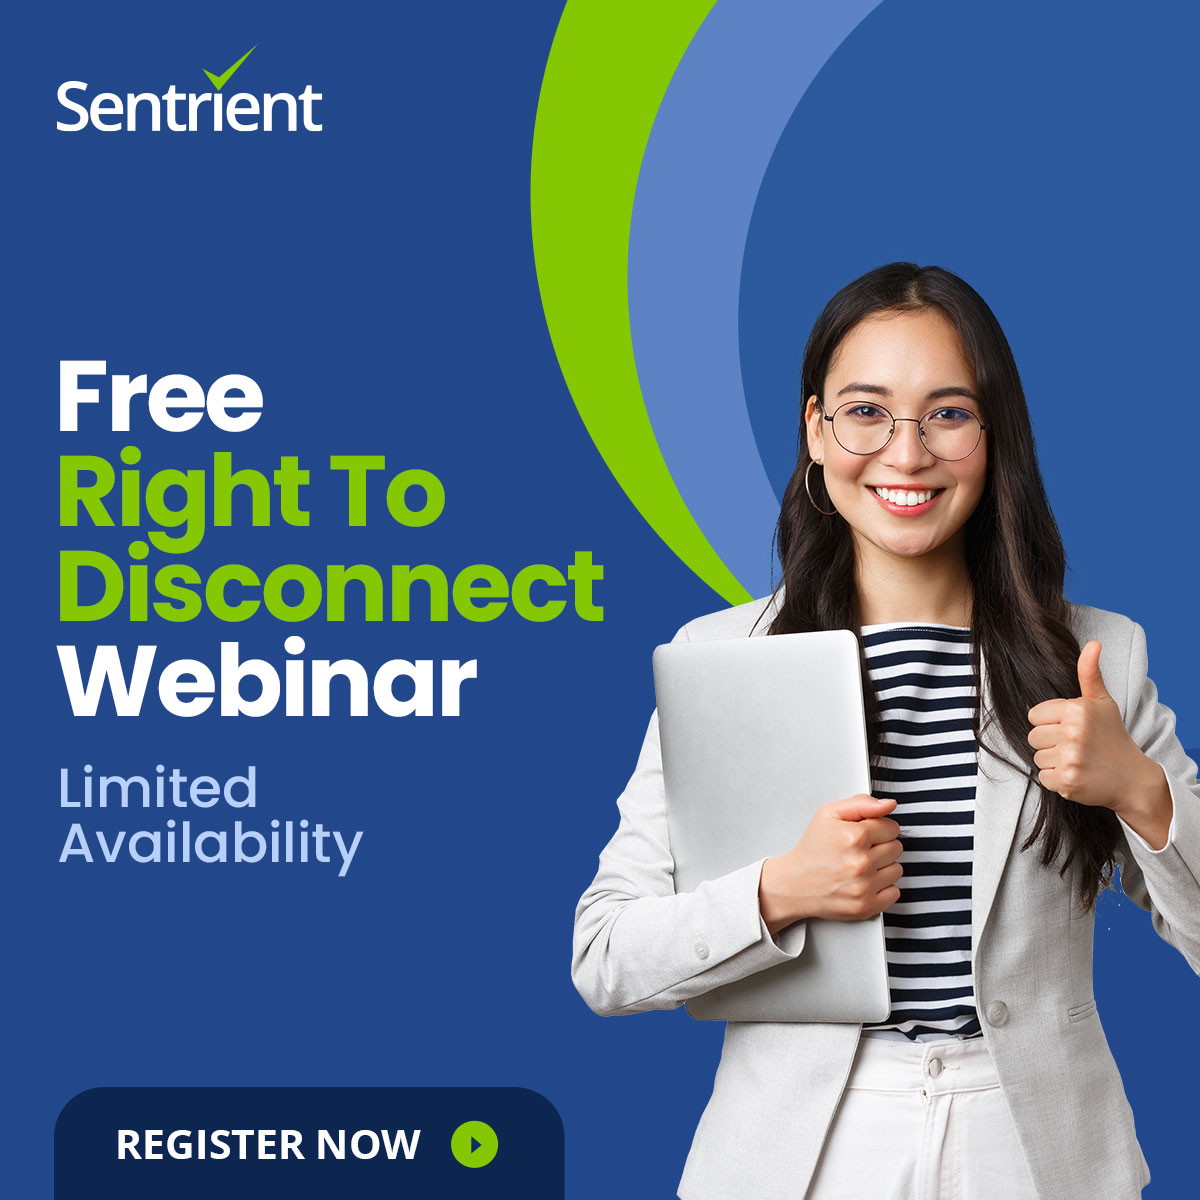 Join our free webinar on Free Right to Disconnect Webinar!
 
Register Now: sentrient.com.au/free-right-to-…
 
#righttodisconnectaustralia #righttodisconnect #freewebinar #righttodisconnecttraining #sentrient